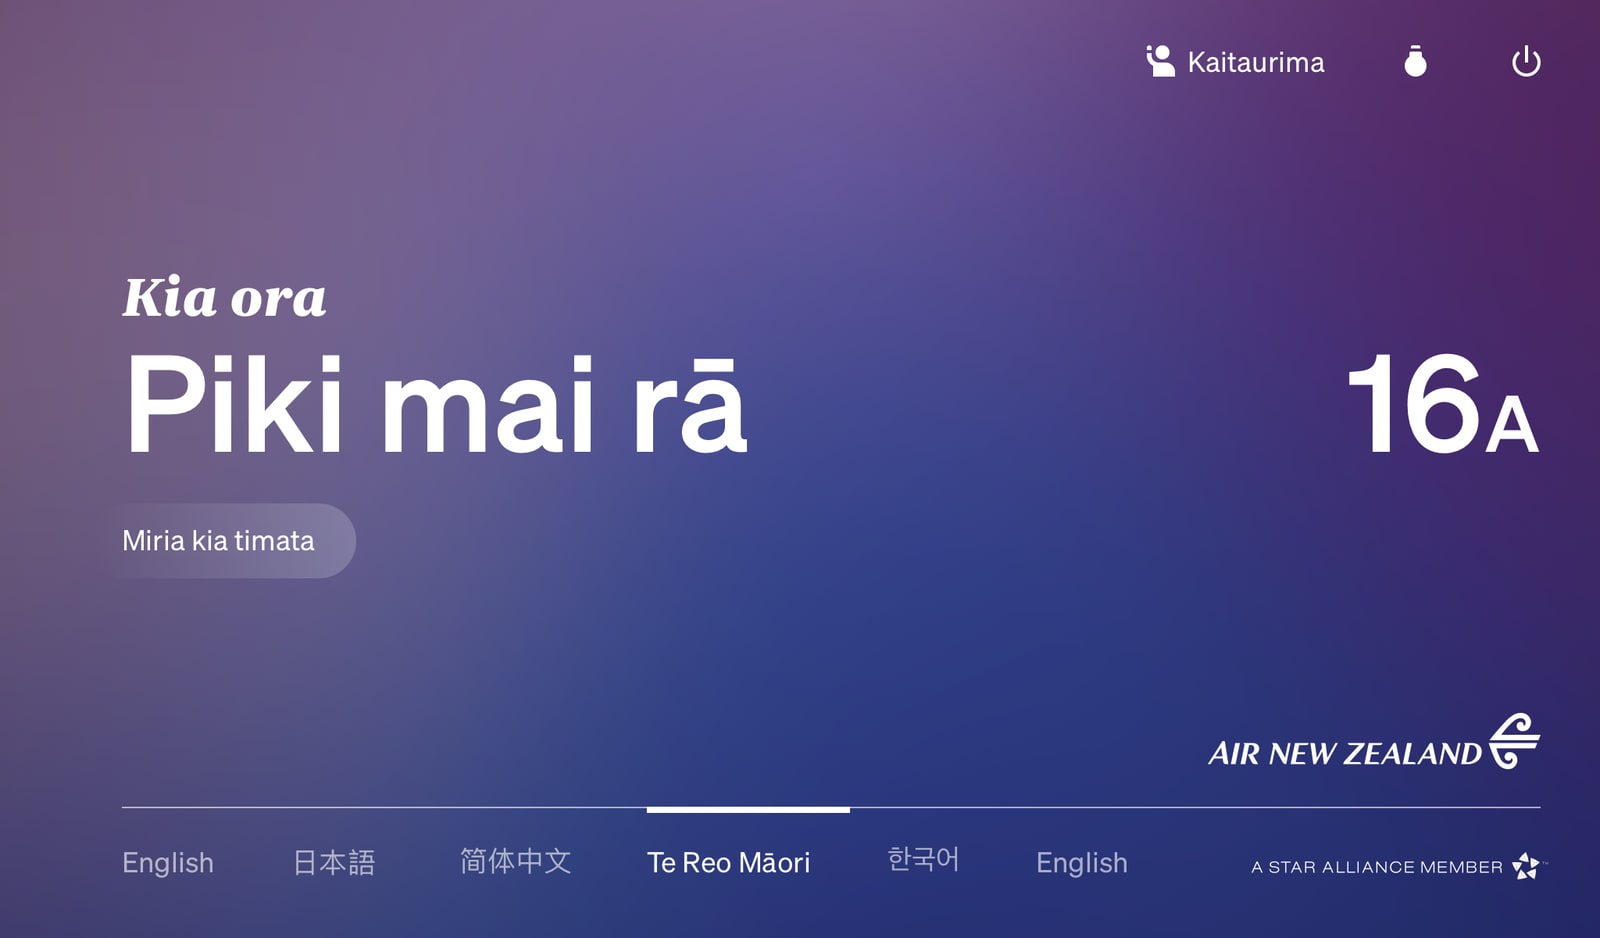 The welcome screen in Te Reo, which is now a fully supported language across the entire system.